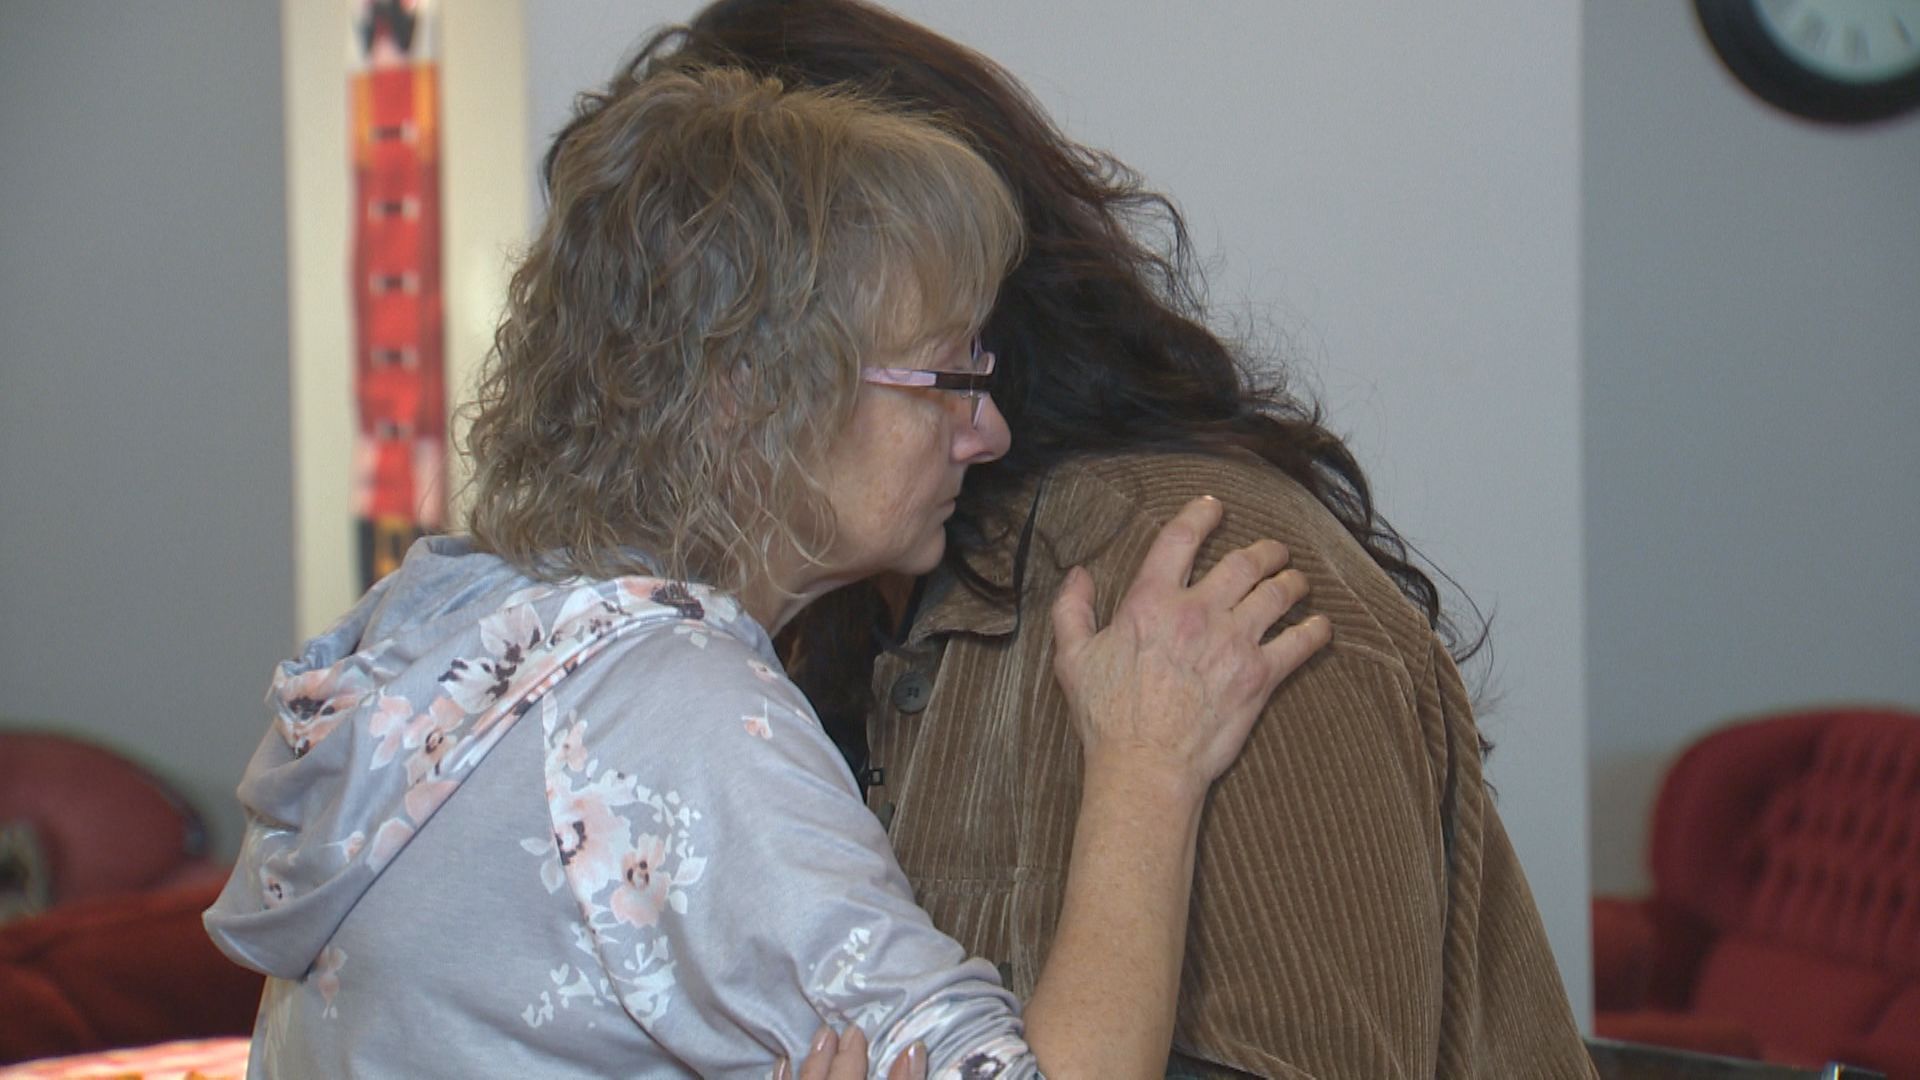 Survivors, victim family members of Carberry bus crash come together in grief, healing